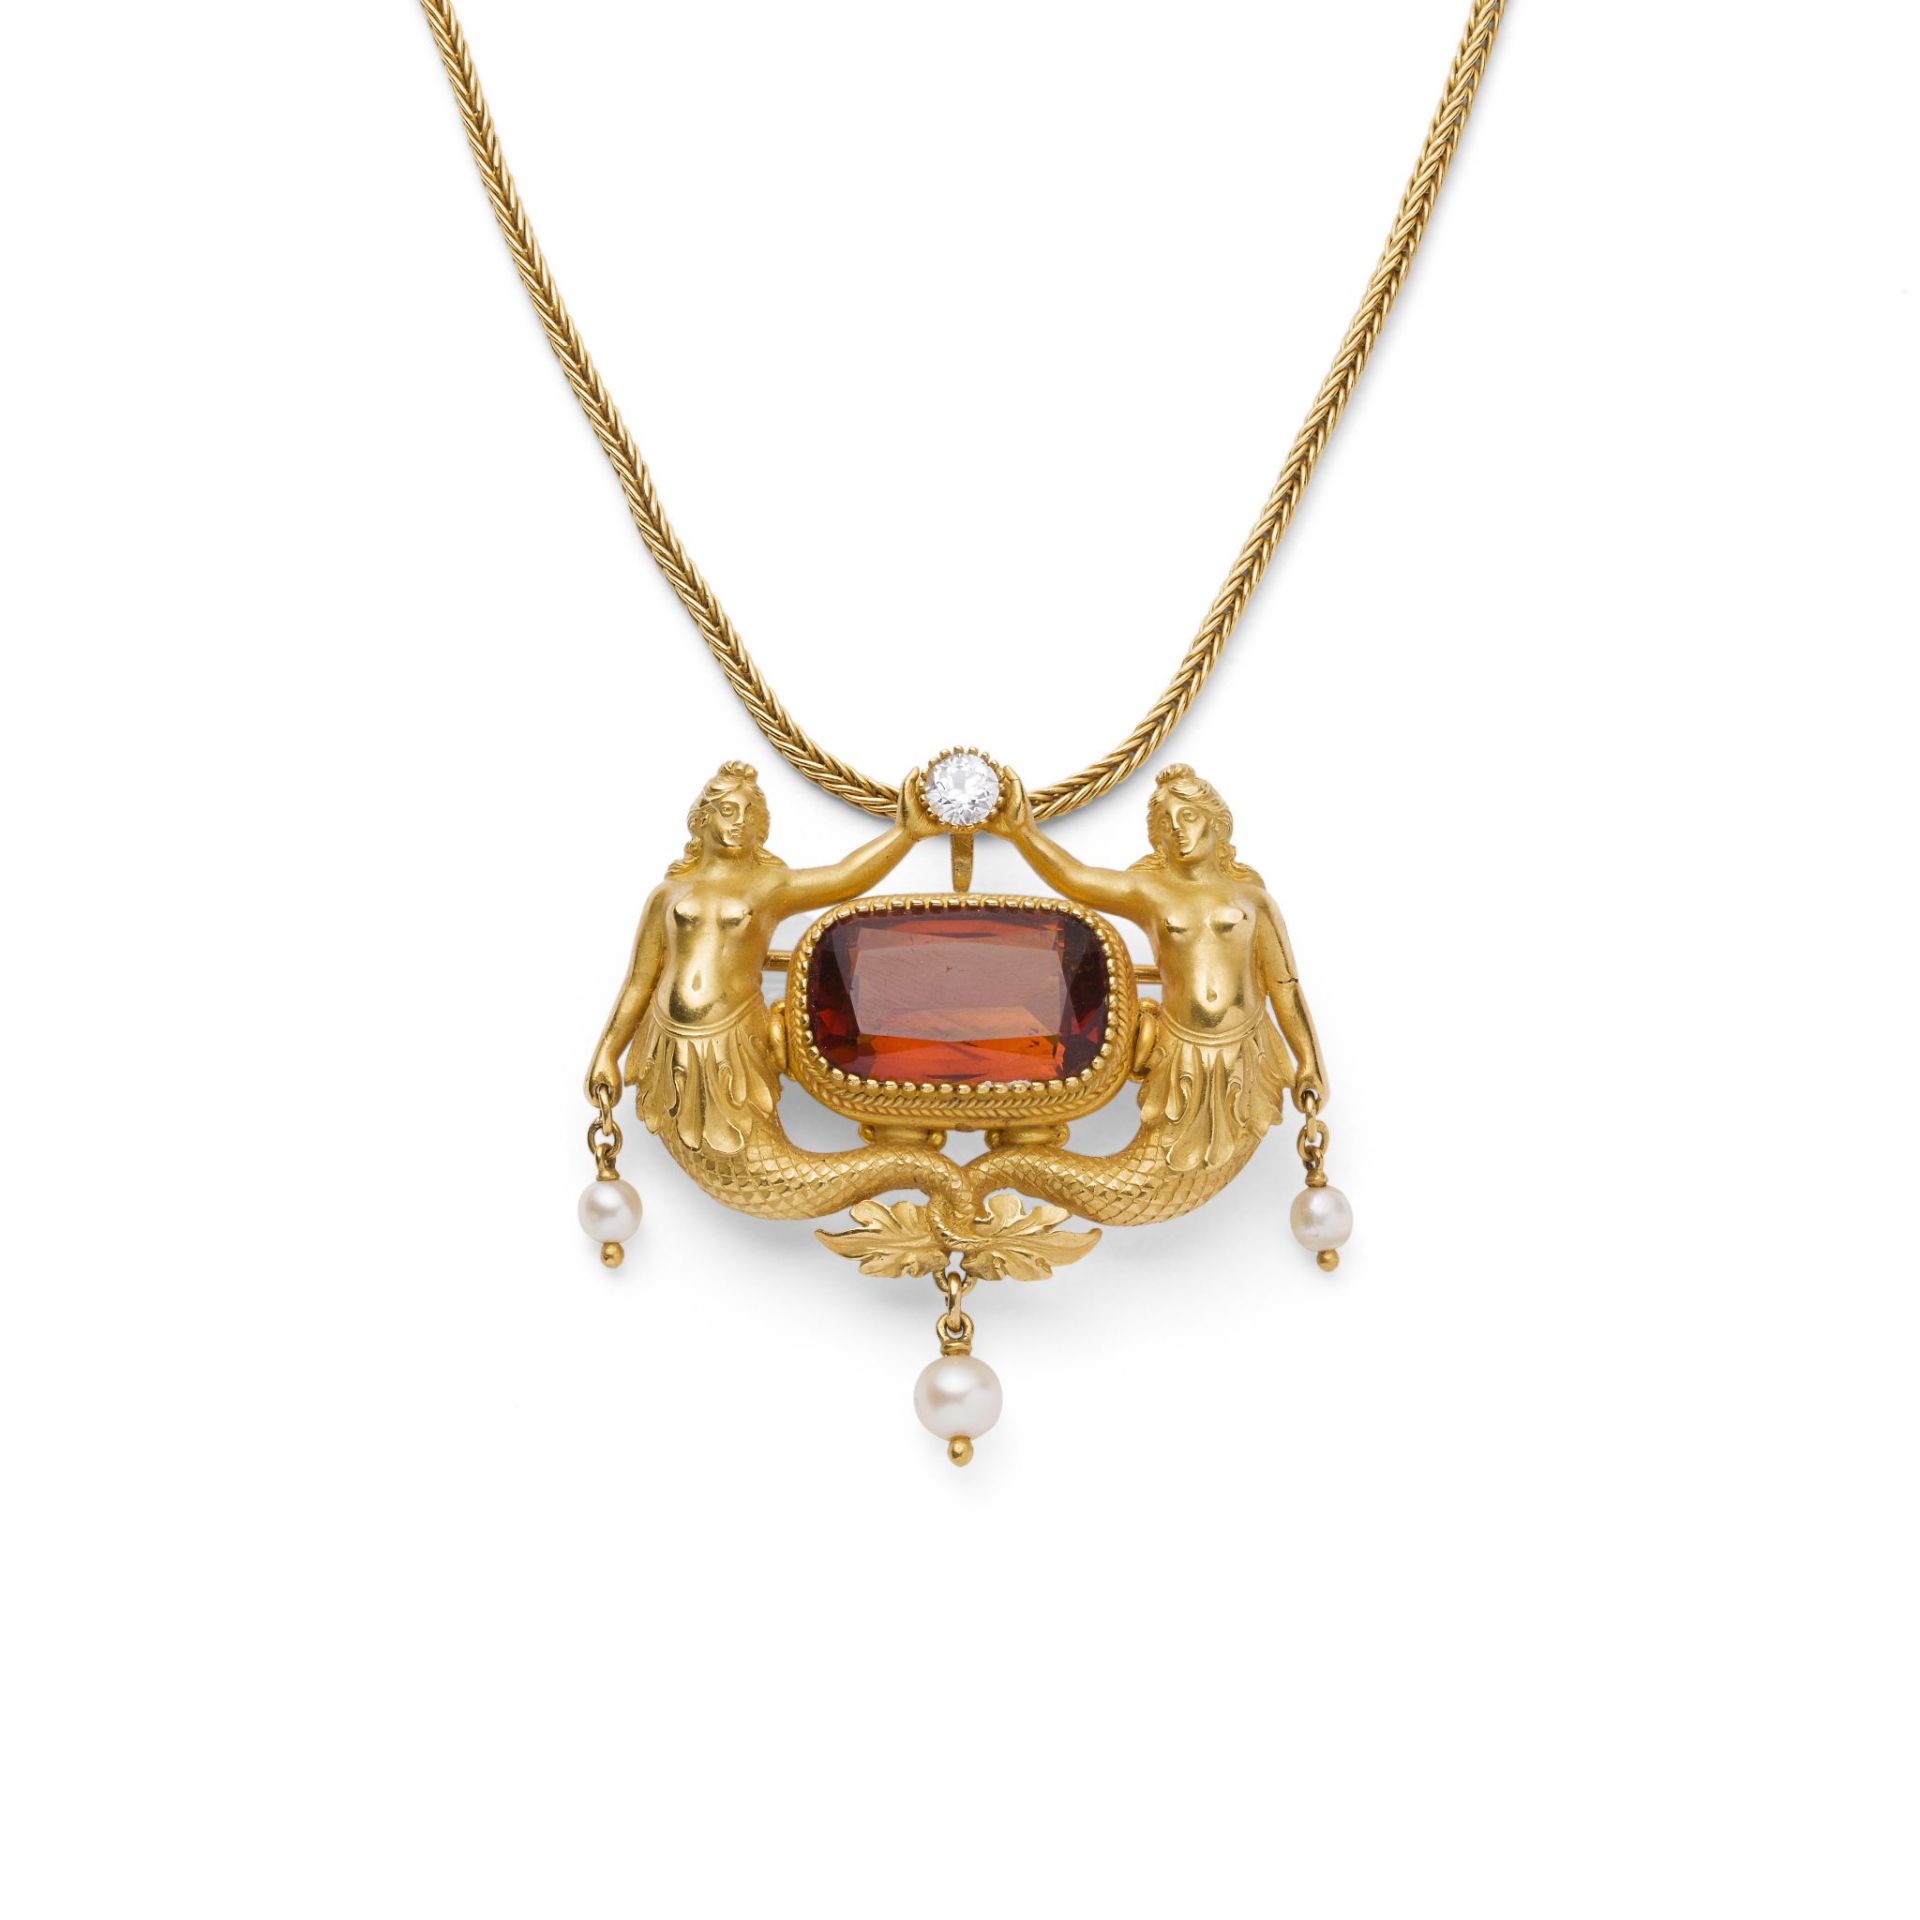 AN ITALIAN LATE 19TH CENTURY GEM-SET PENDANT/BROOCH AND CHAIN